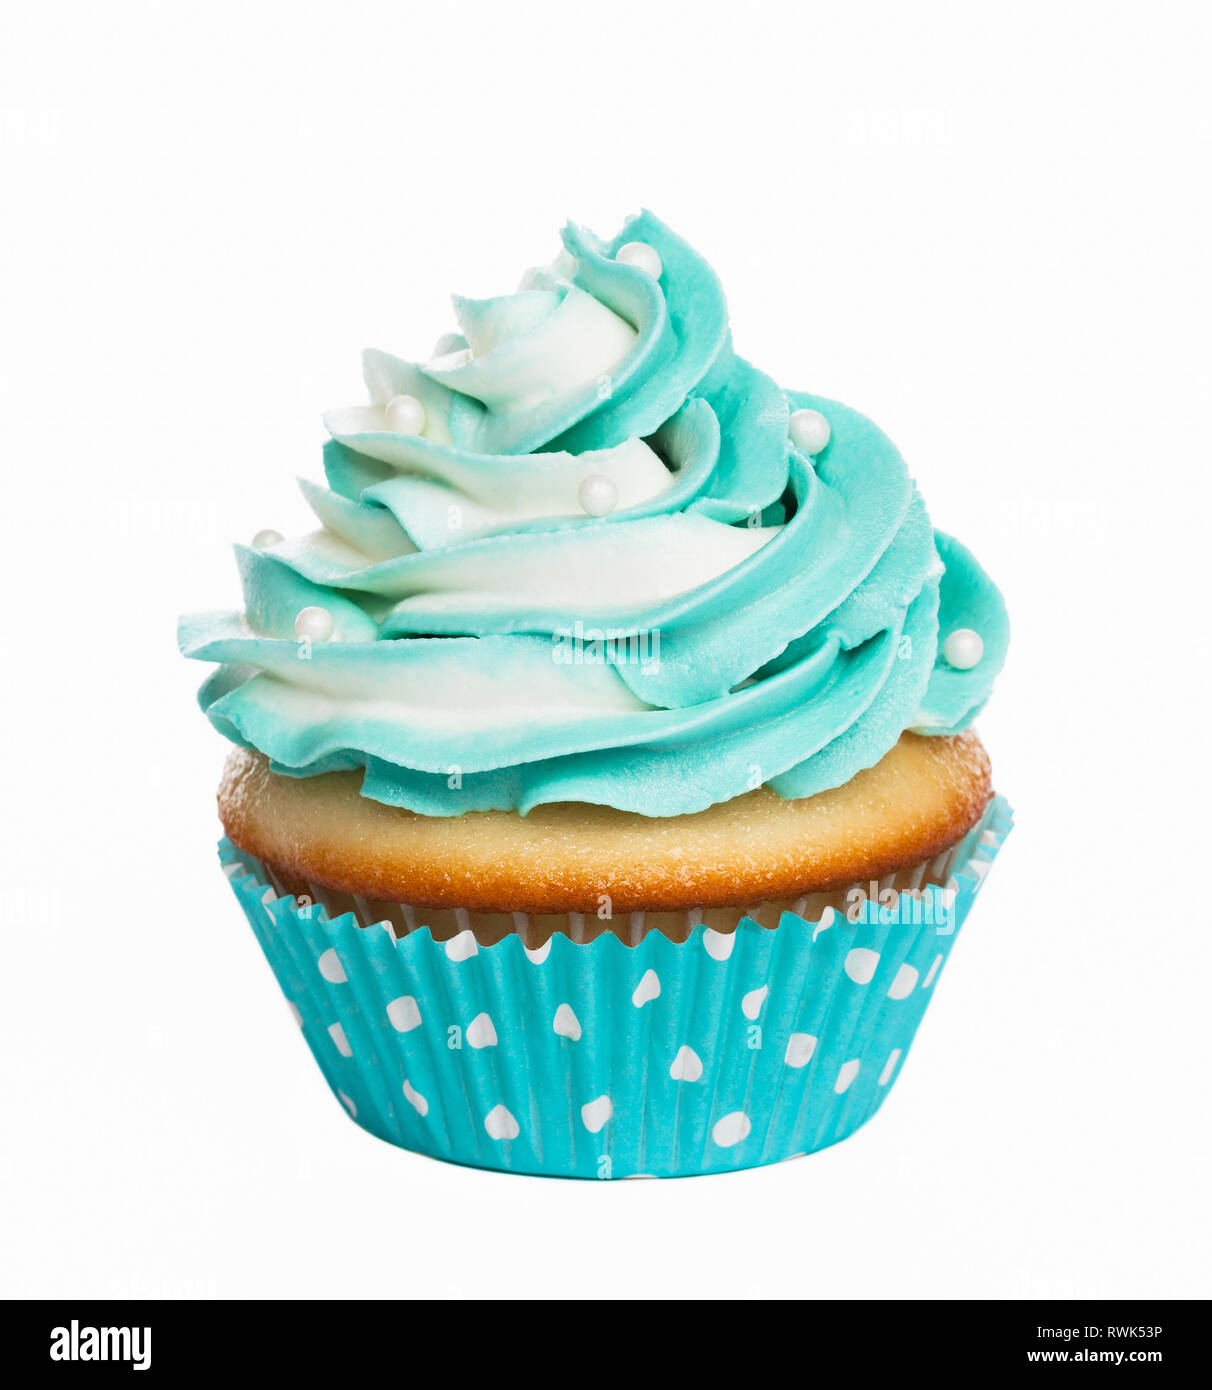 Teal birthday cupcake crème au beurre cerise isolated on white Banque D'Images